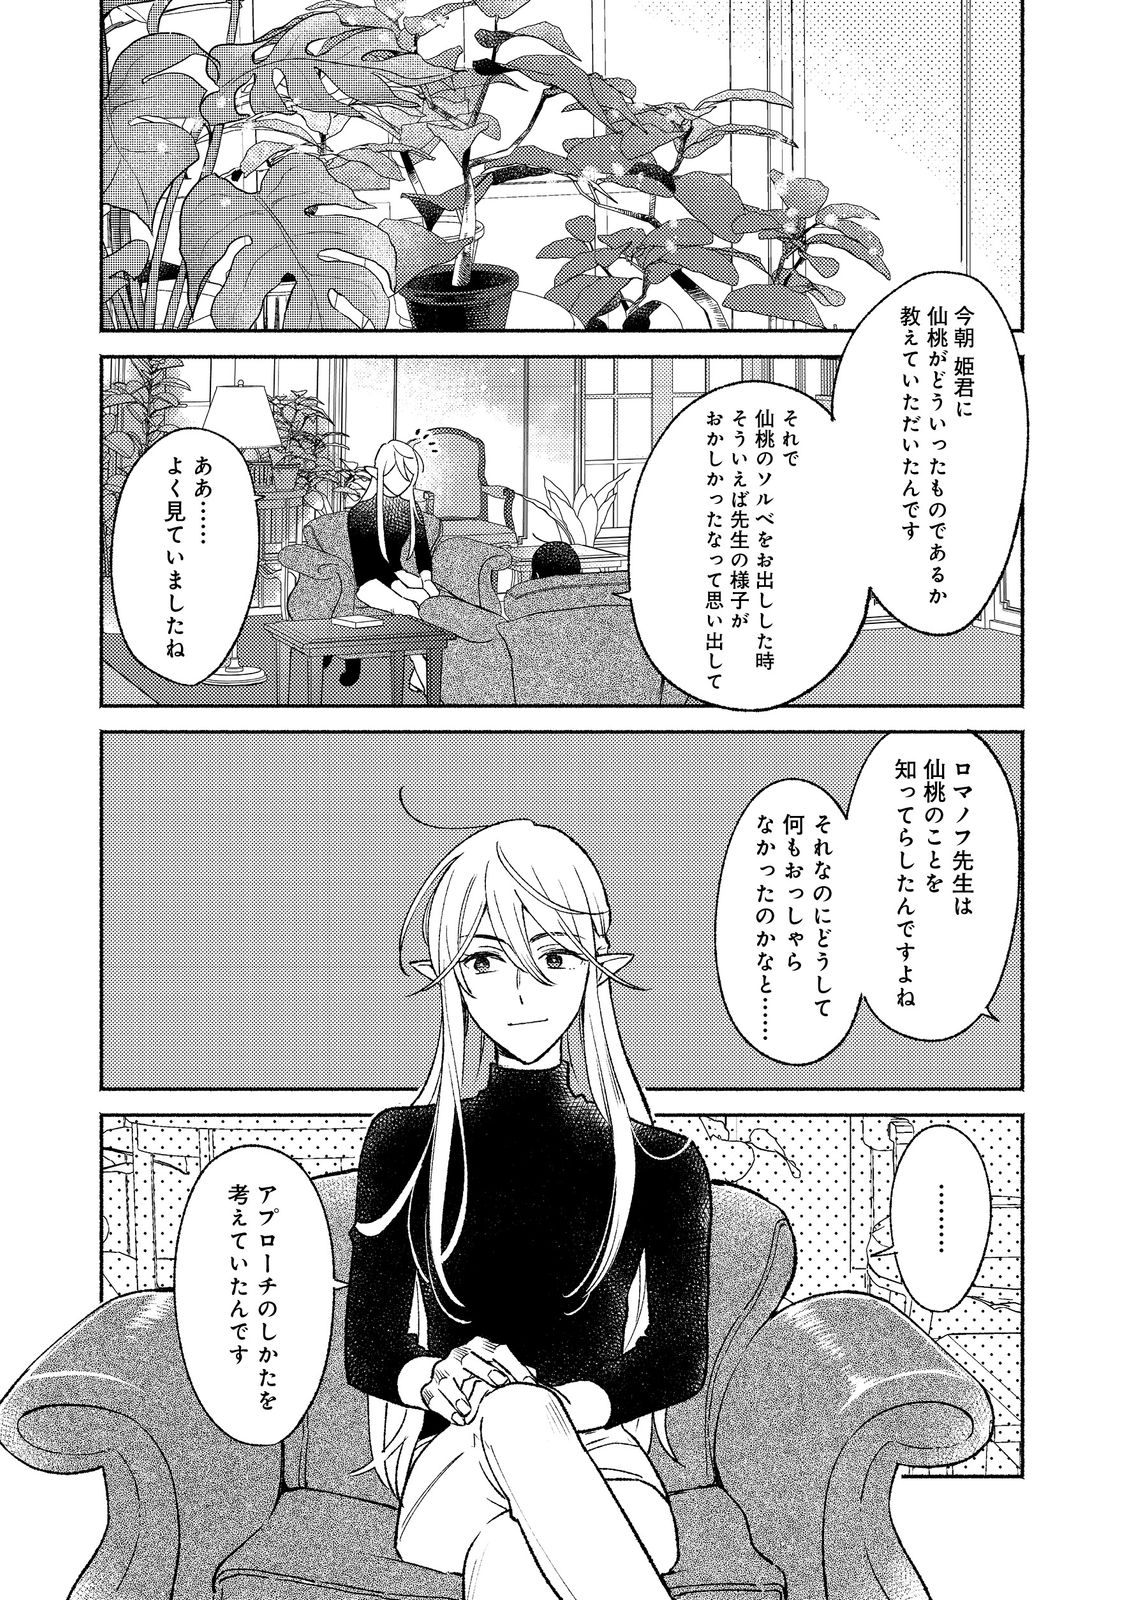 I’m the White Pig Nobleman 第16.1話 - Page 11